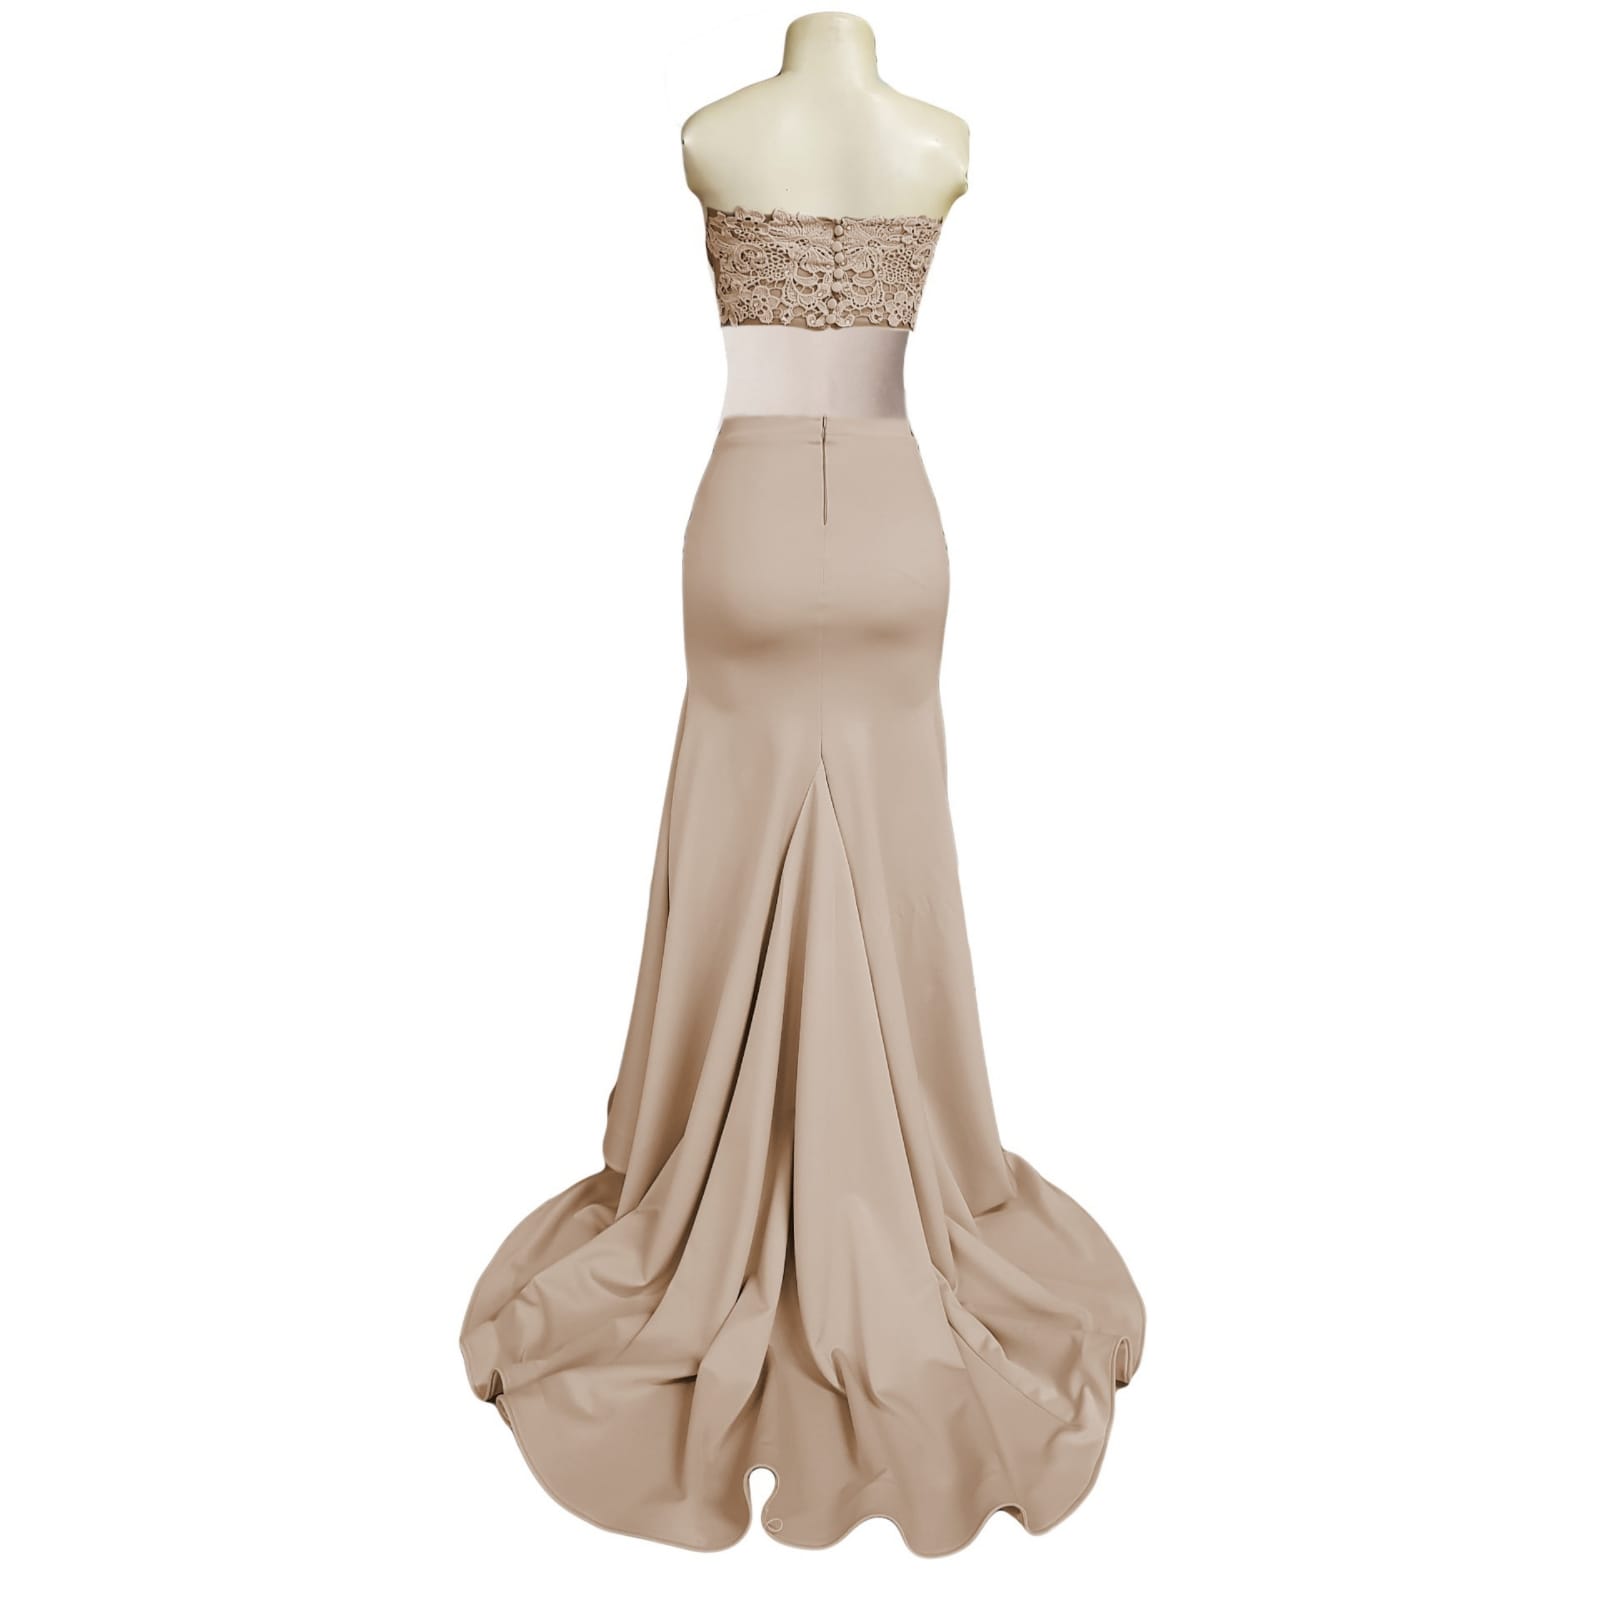 2 piece beige gala dress with high slit 4 2 piece beige gala dress, long skirt with high slit and a long train and waistband. Short lace top with back button detail.